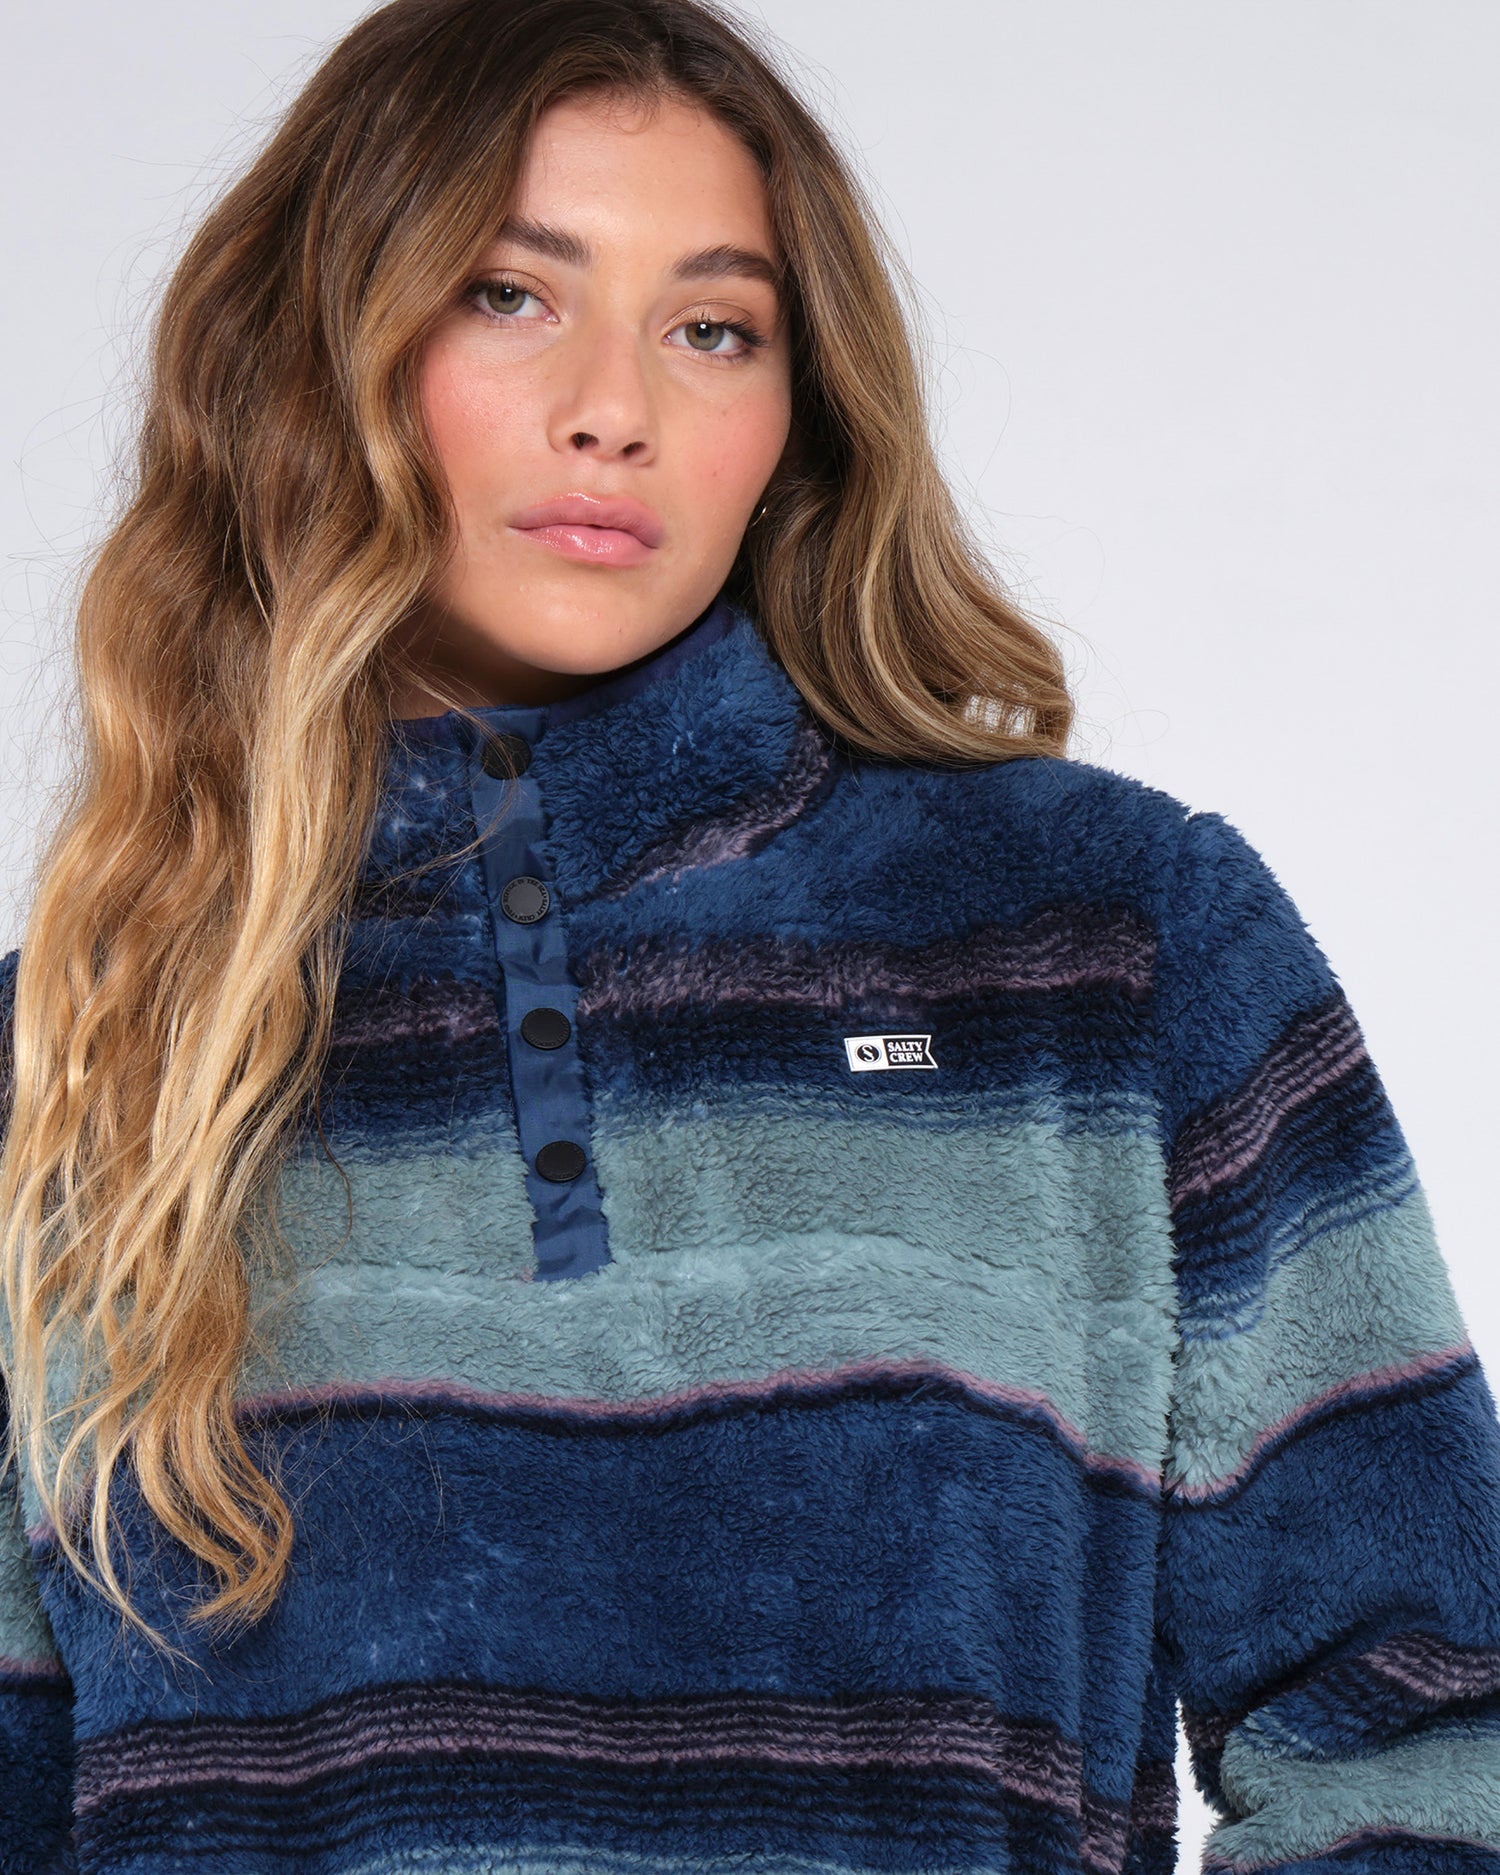 On body close up shot of the Calm Seas Blue Steel Pullover